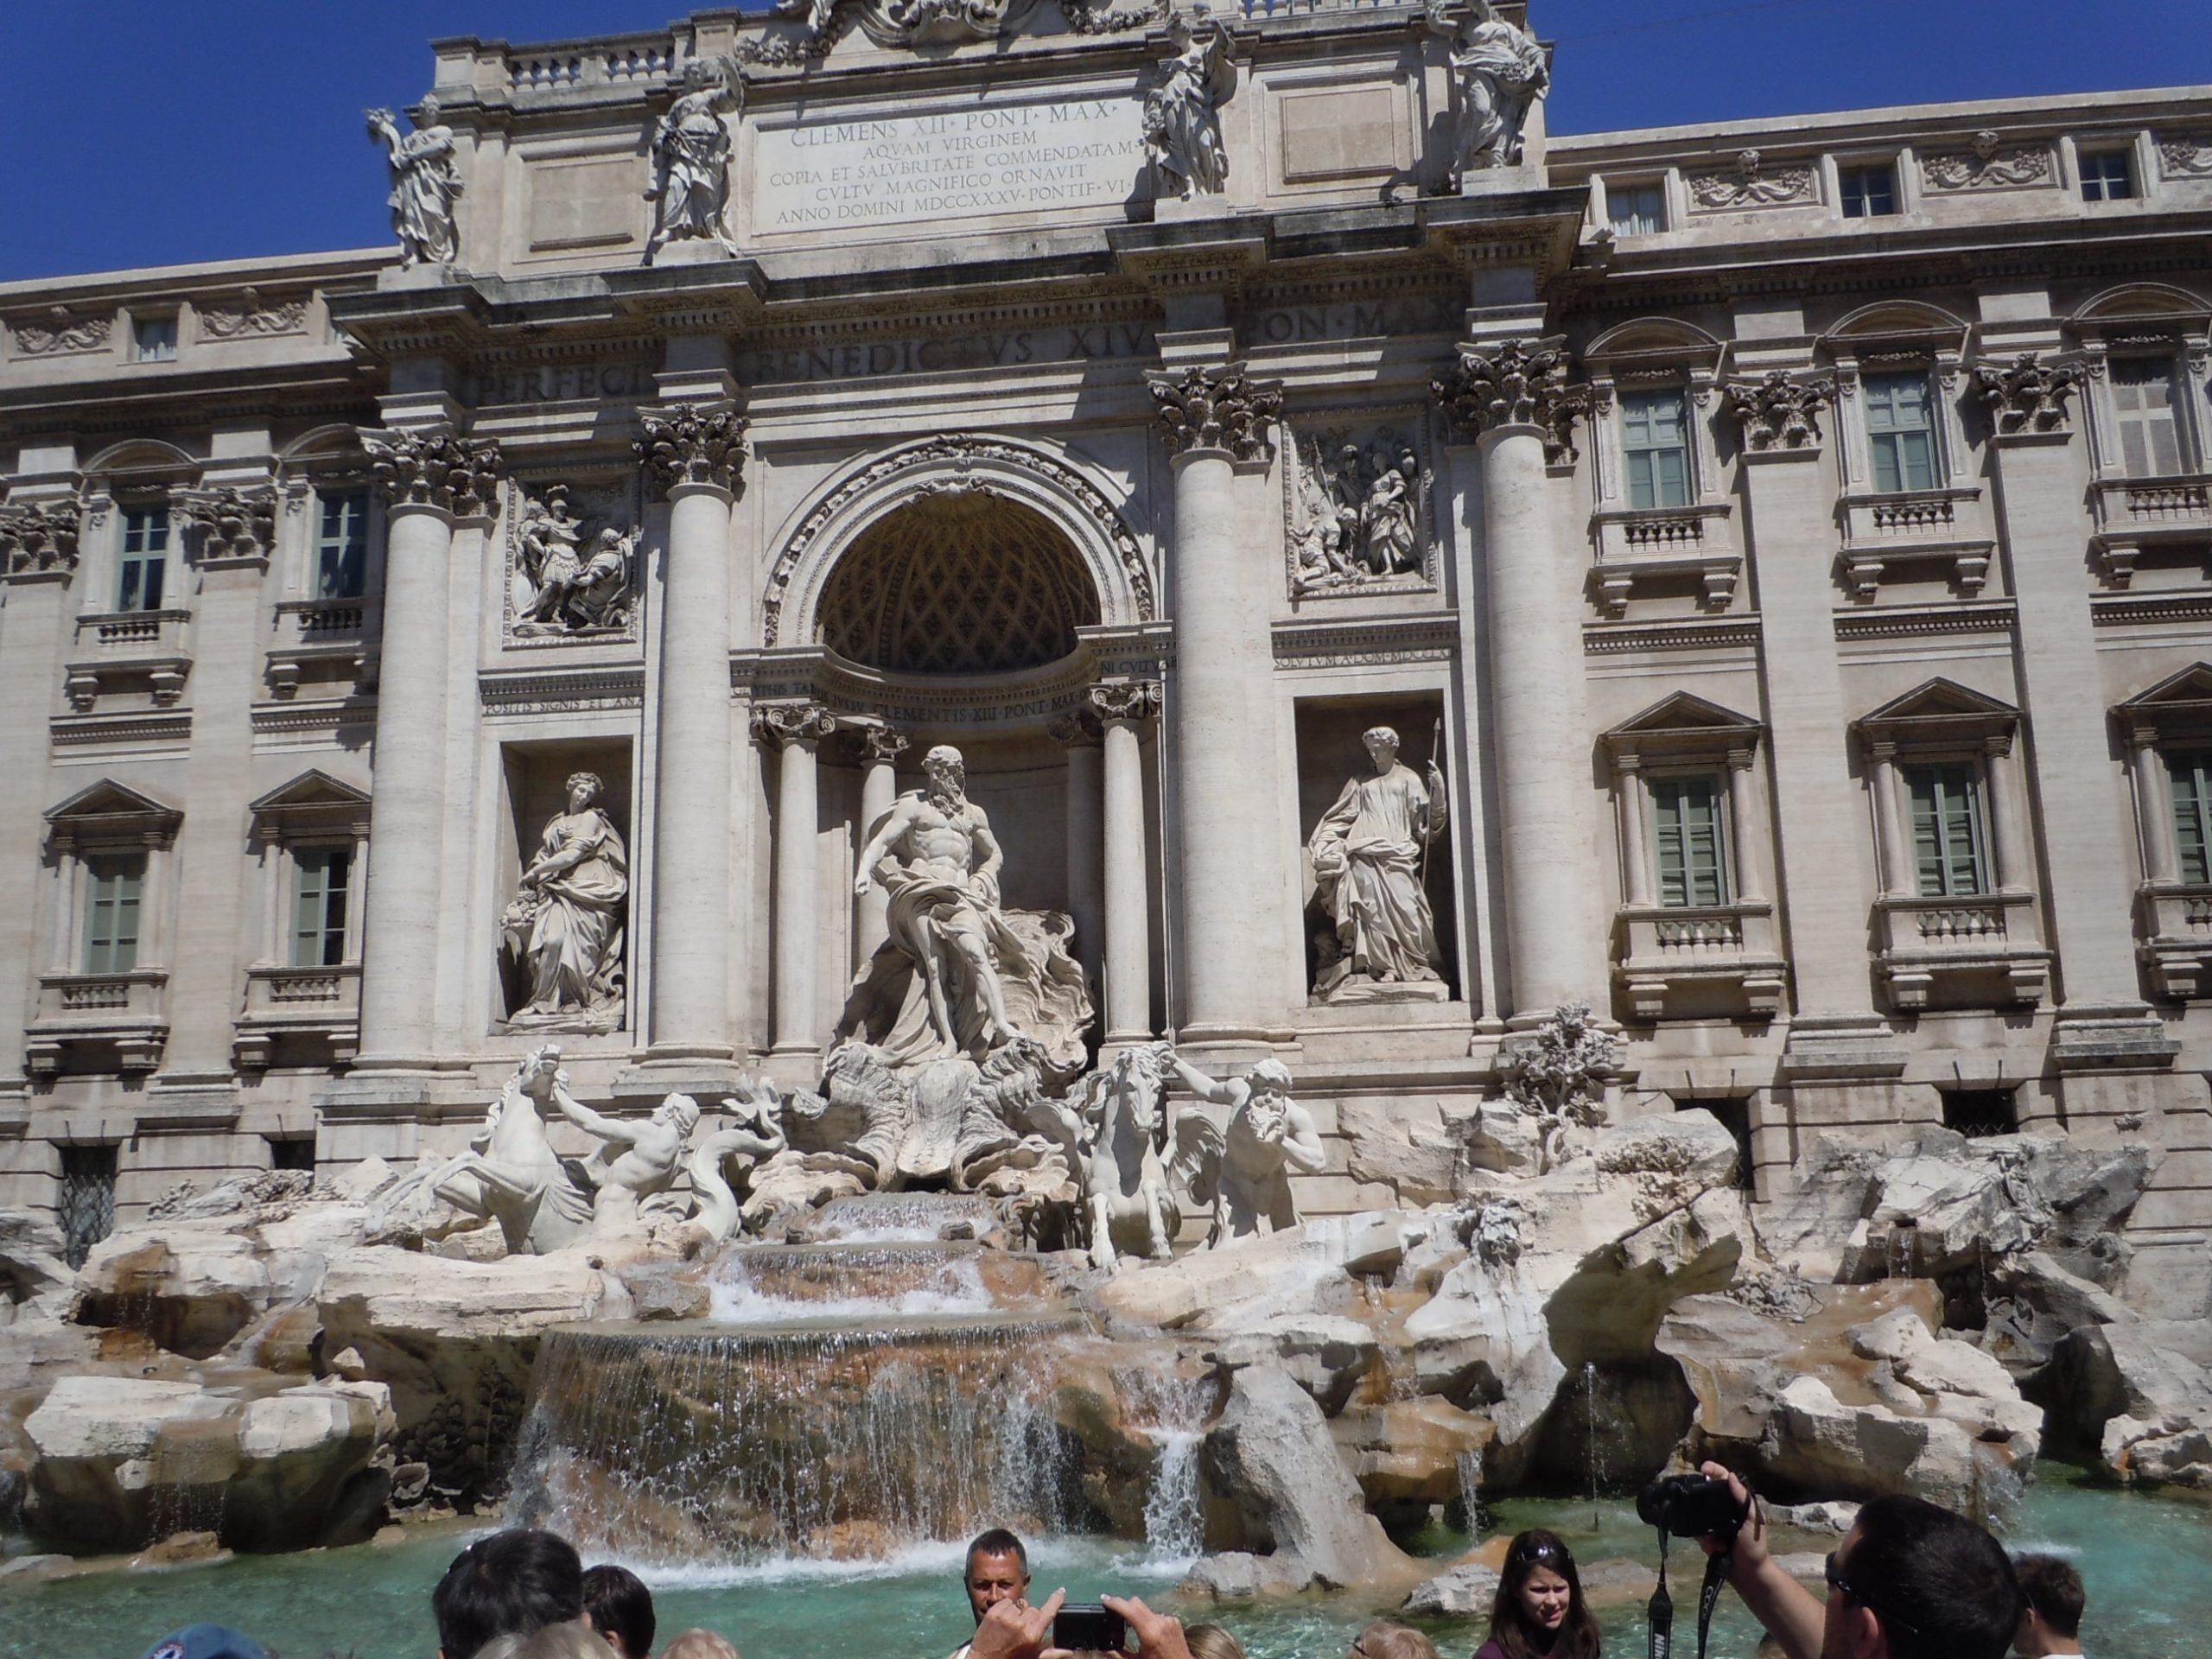 bring three coins to the Trevi fountain